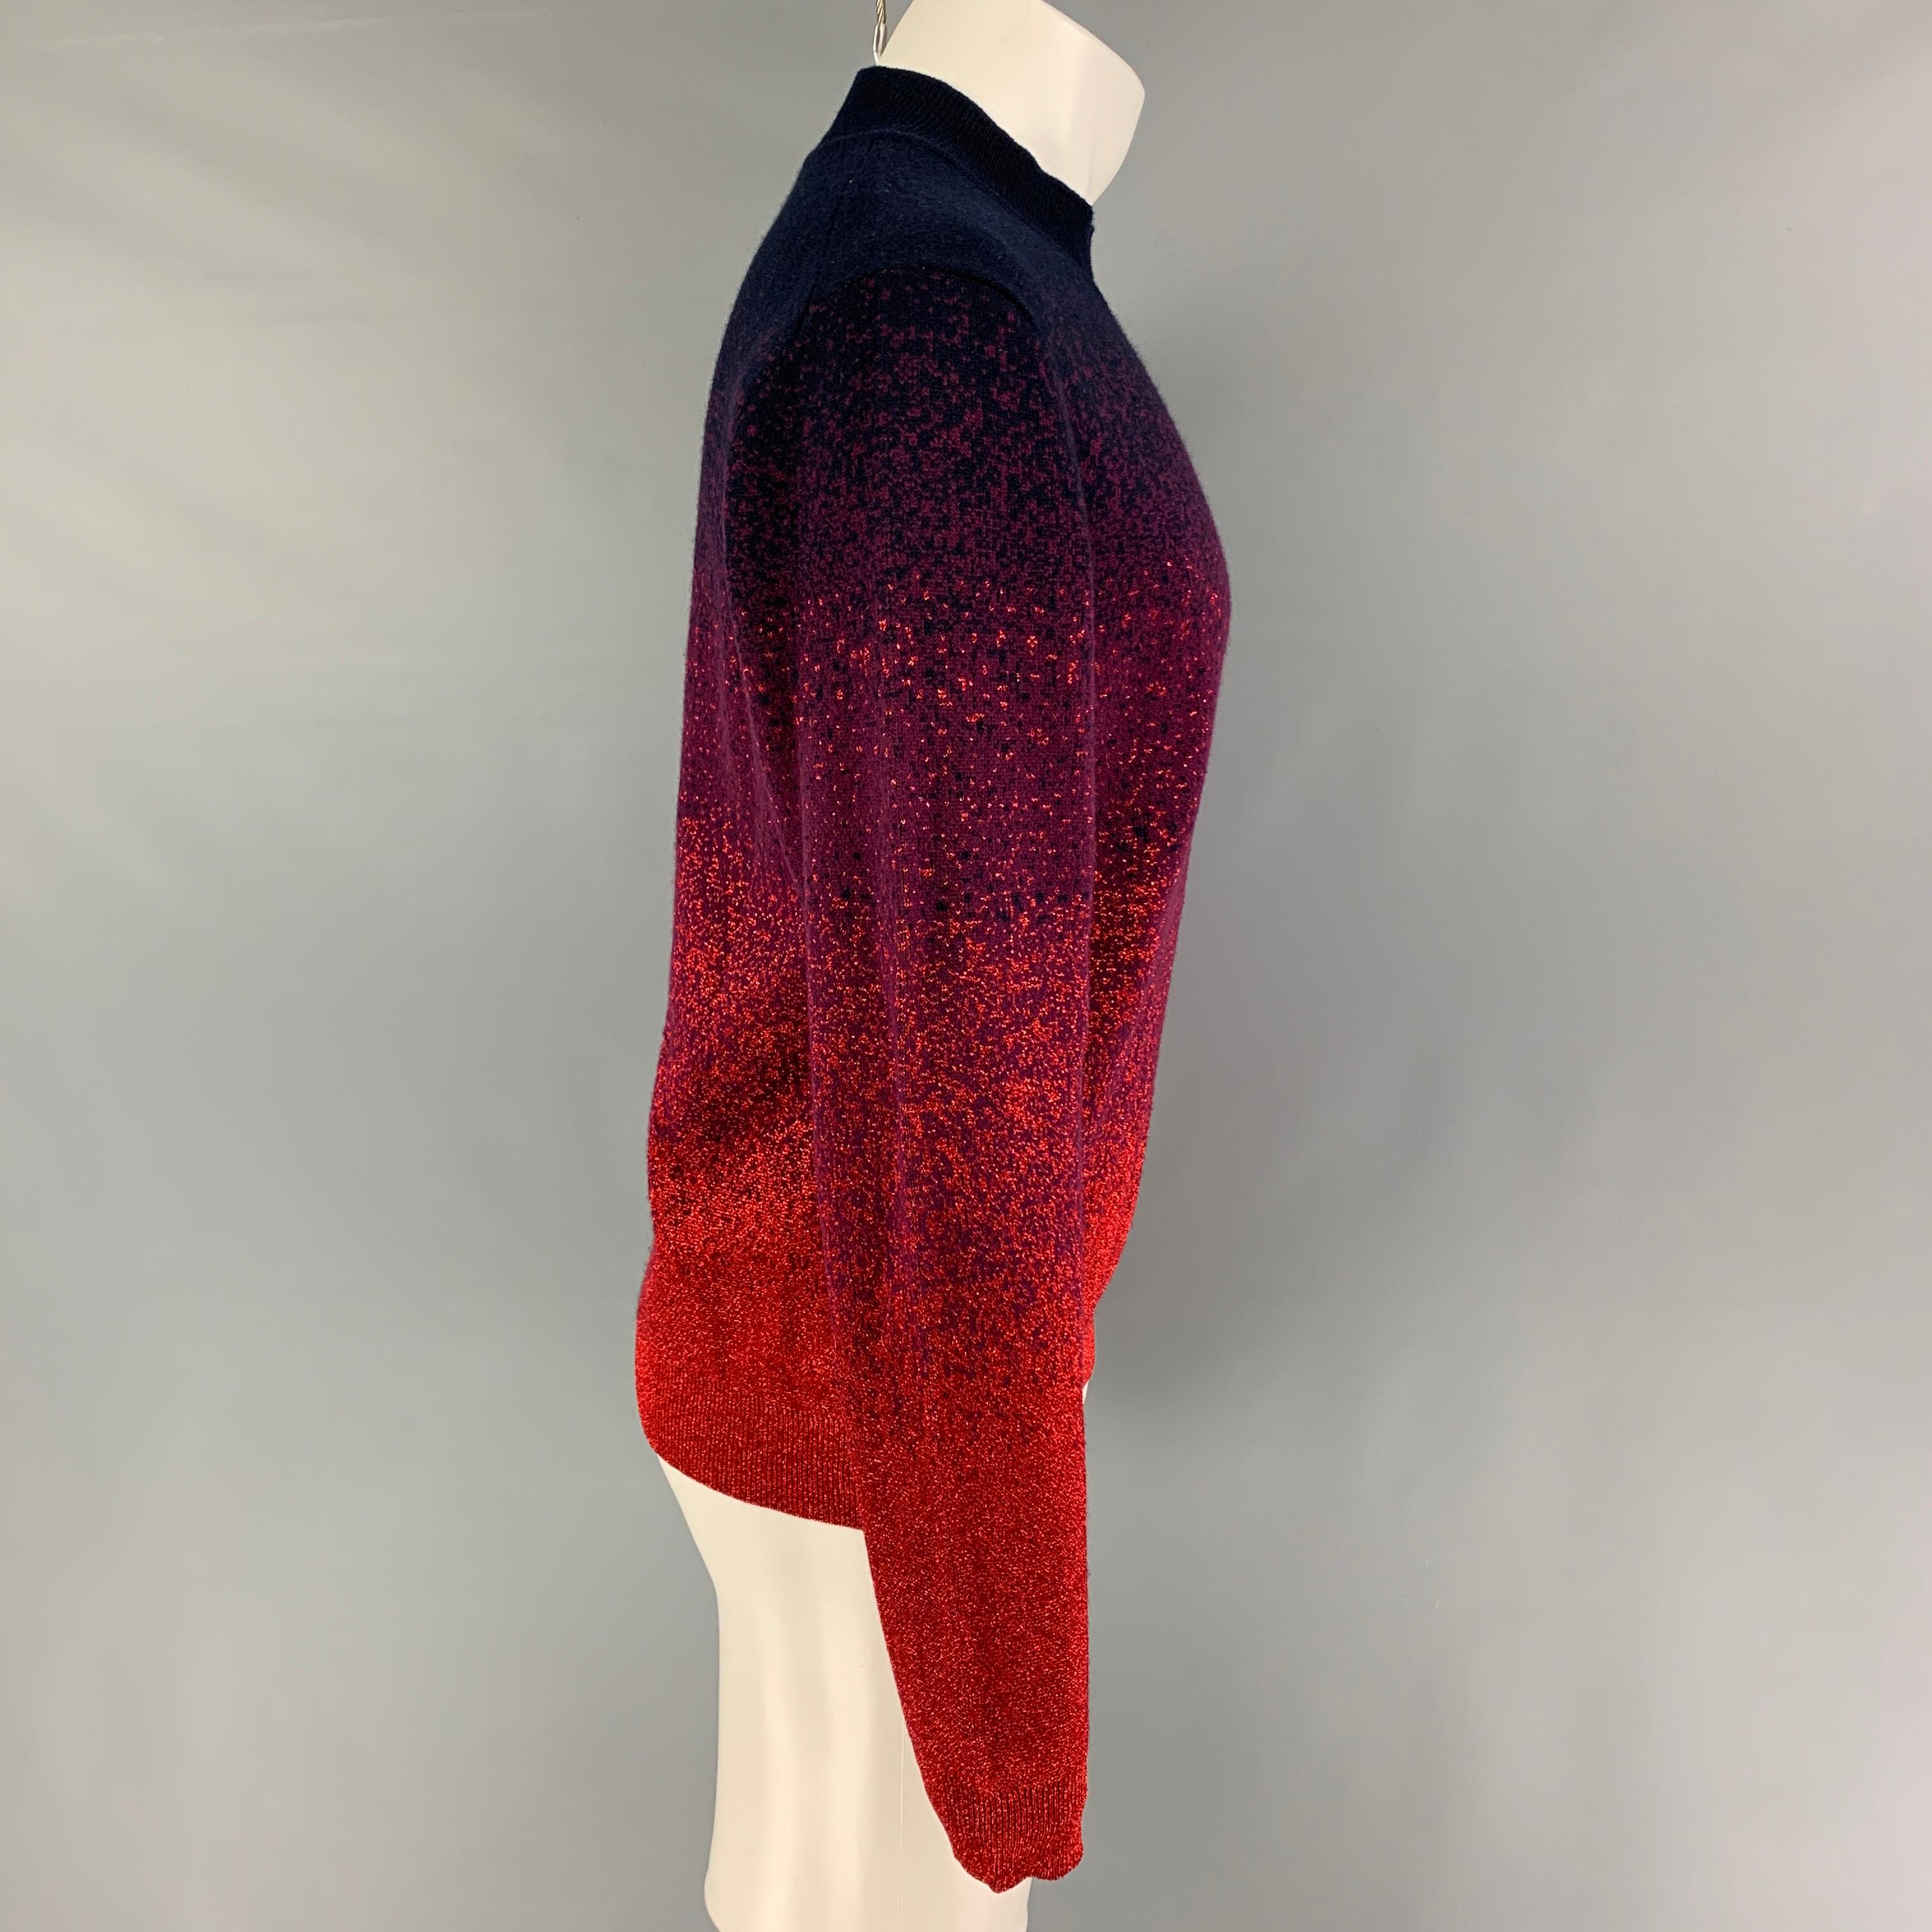 MISSONI pullover comes in a navy & red ombre metallic wool blend featuring a mock neck. Made in Italy.

Very Good Pre-Owned Condition.
Marked: 50

Measurements:

Shoulder: 21 in.
Chest: 42 in.
Sleeve: 27 in.
Length: 25.5 in. 